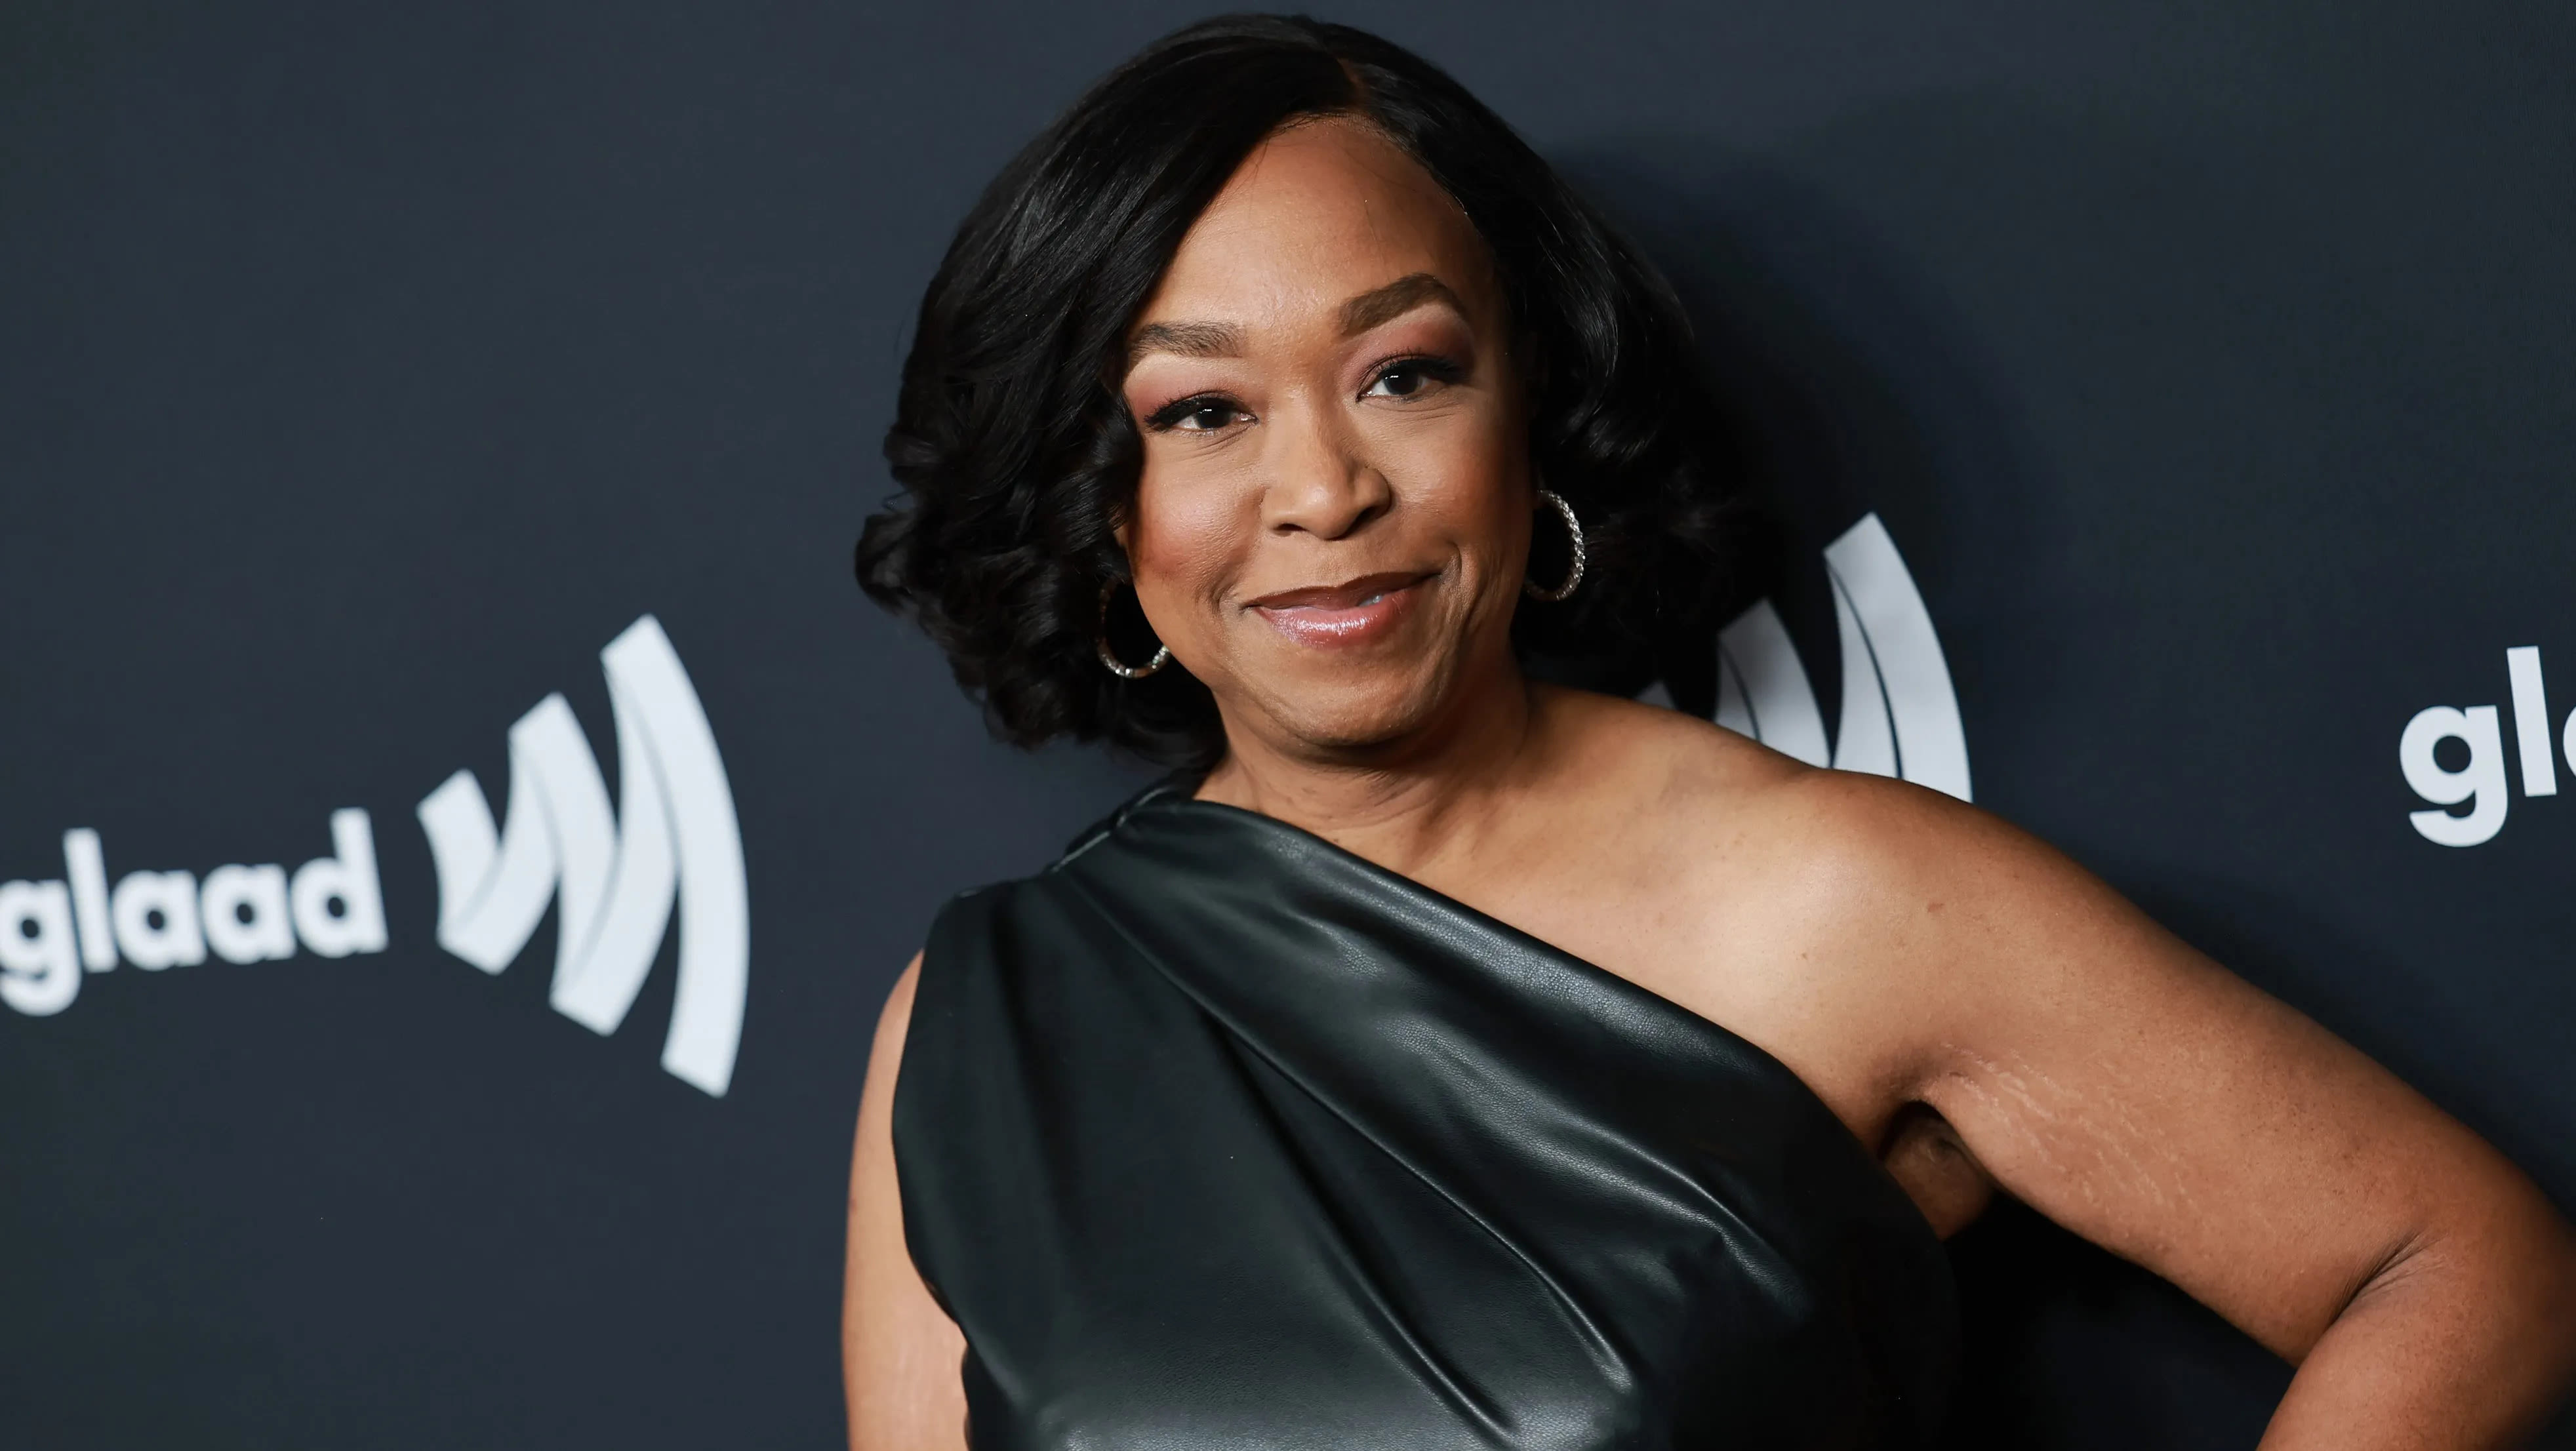 Shonda Rhimes enters her ‘golf girl era’ as a new owner of the Los Angeles Golf Club